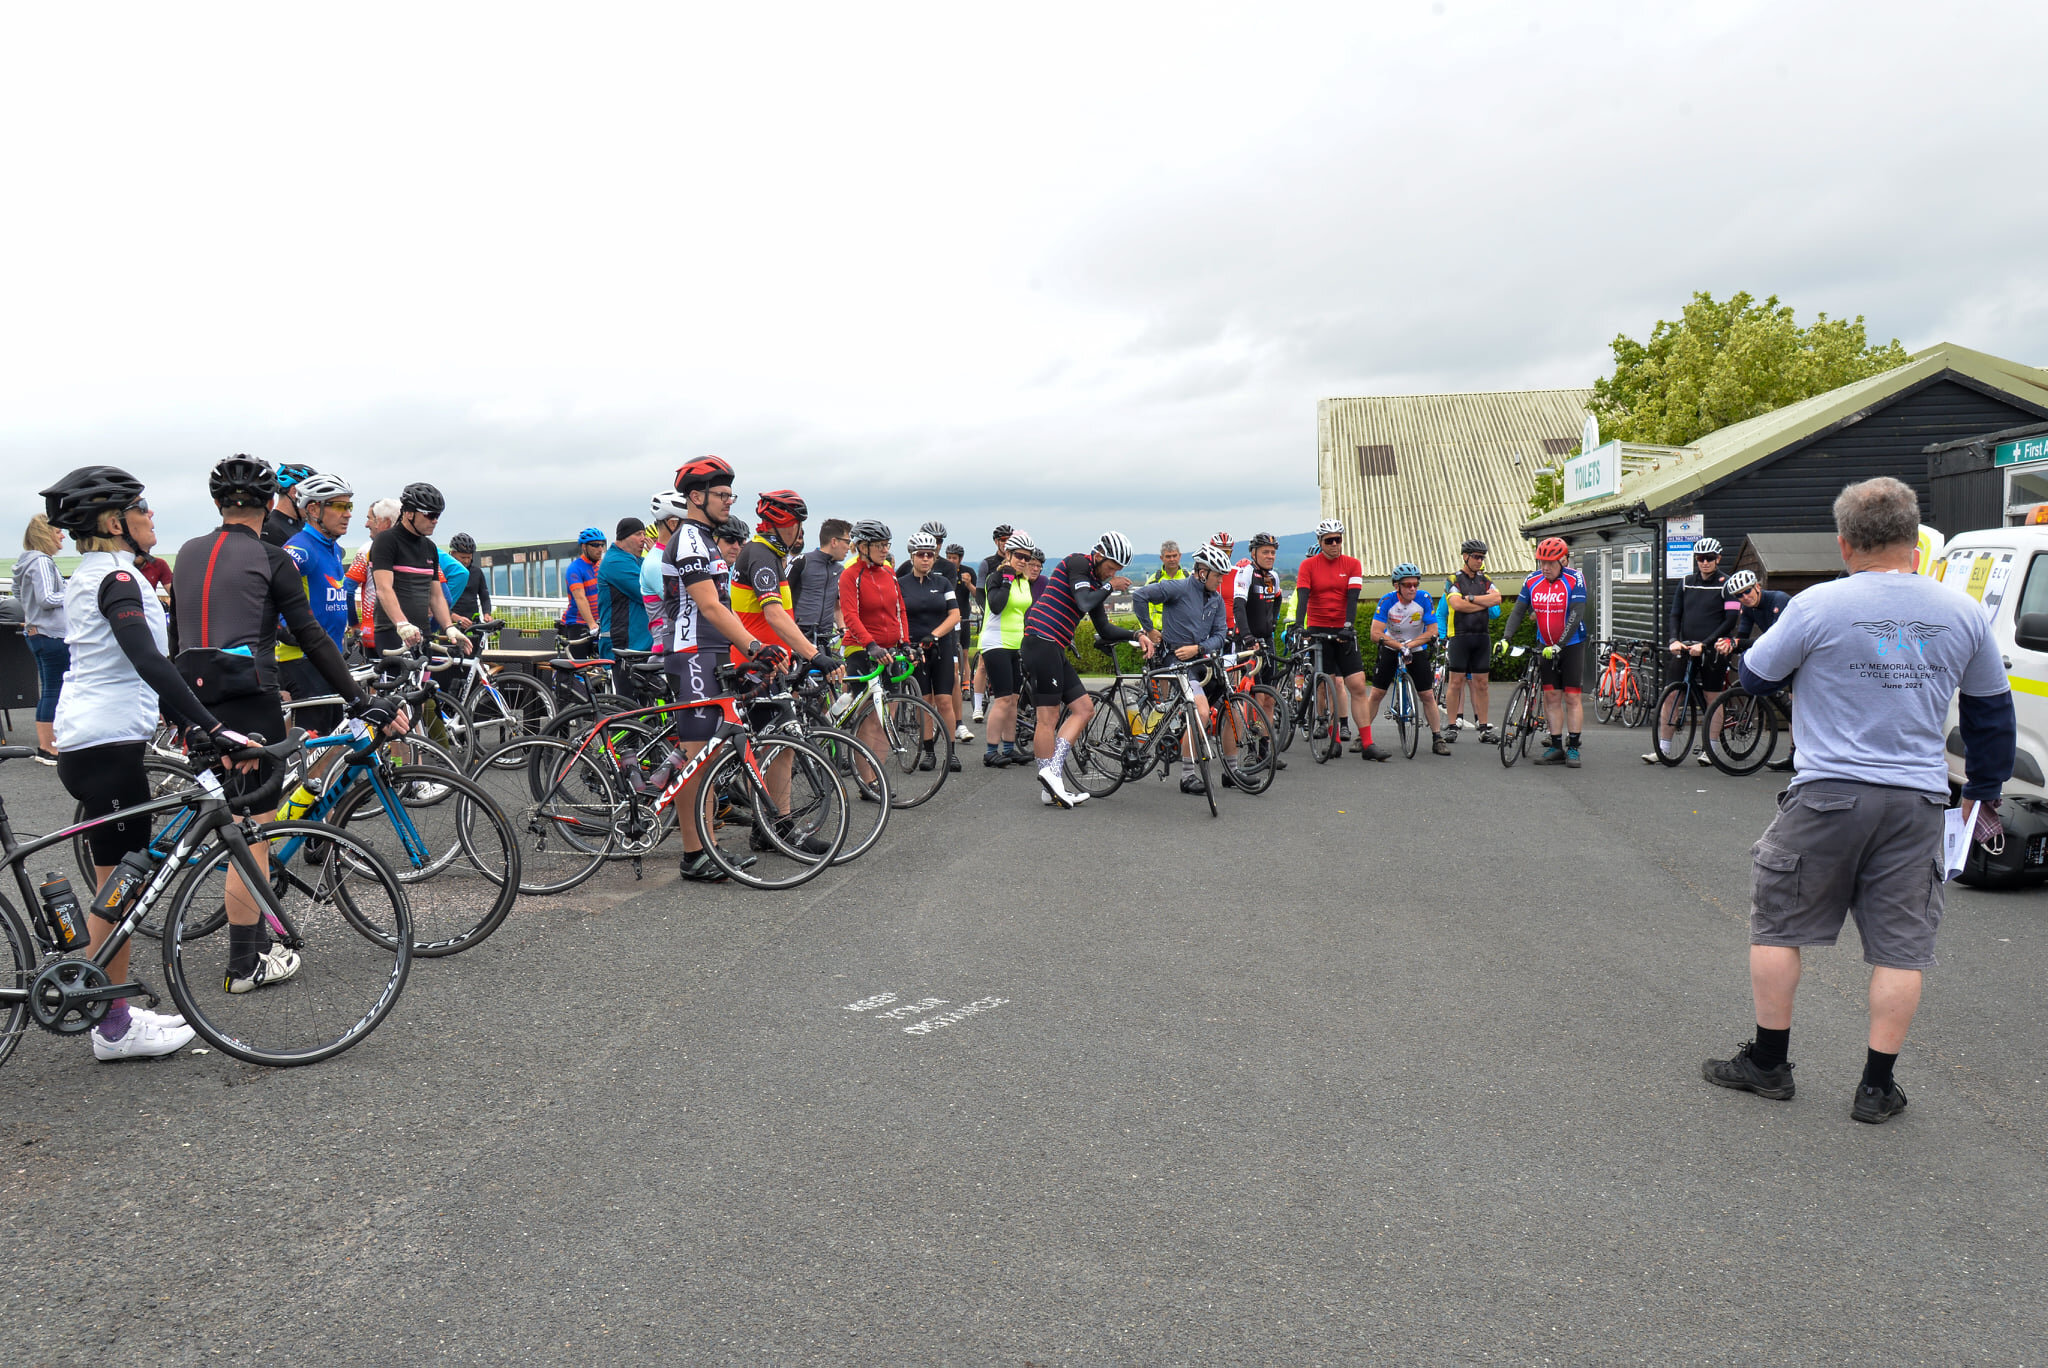 Cyclists for 68 mile ELY june 2021.jpg